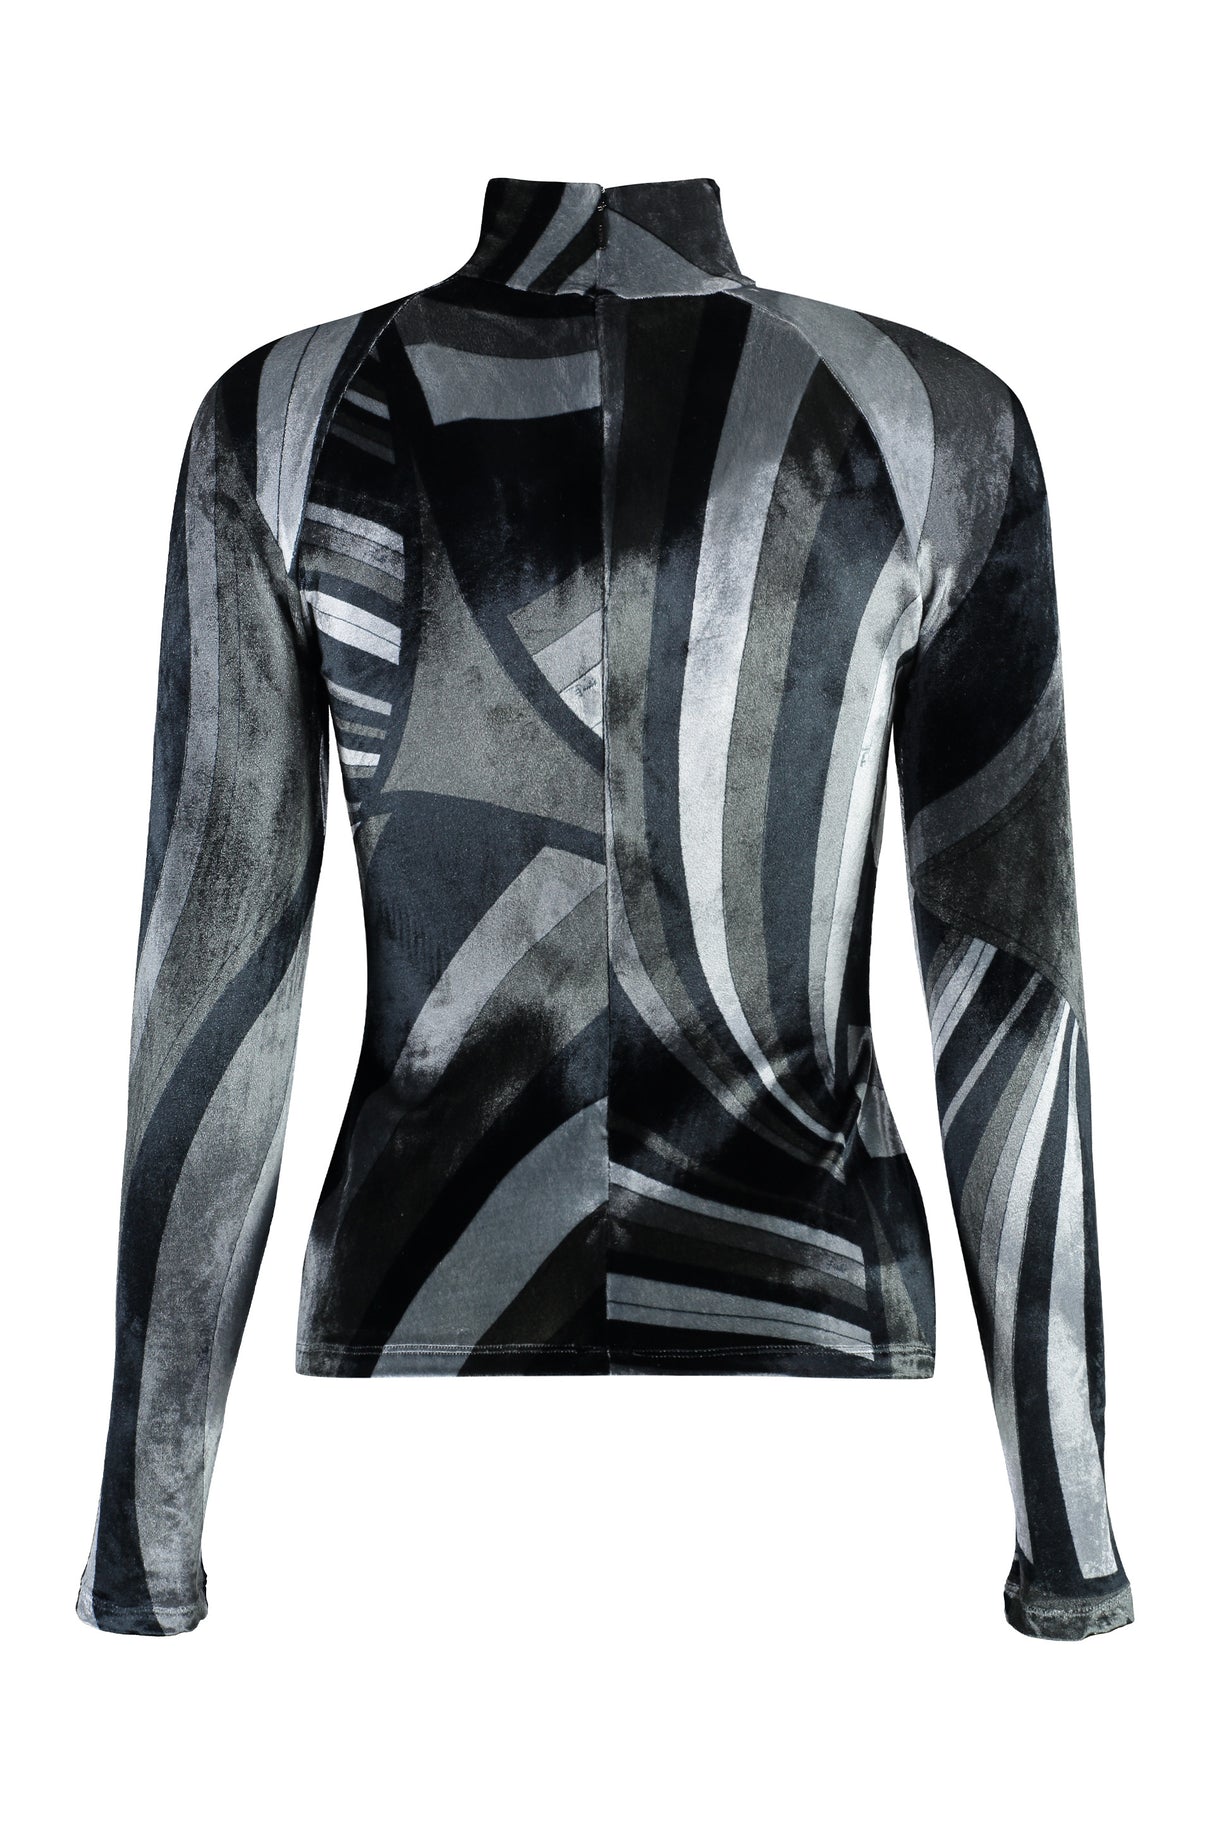 EMILIO PUCCI Multicolor Chenille Printed Long-Sleeve Top for Women - FW23